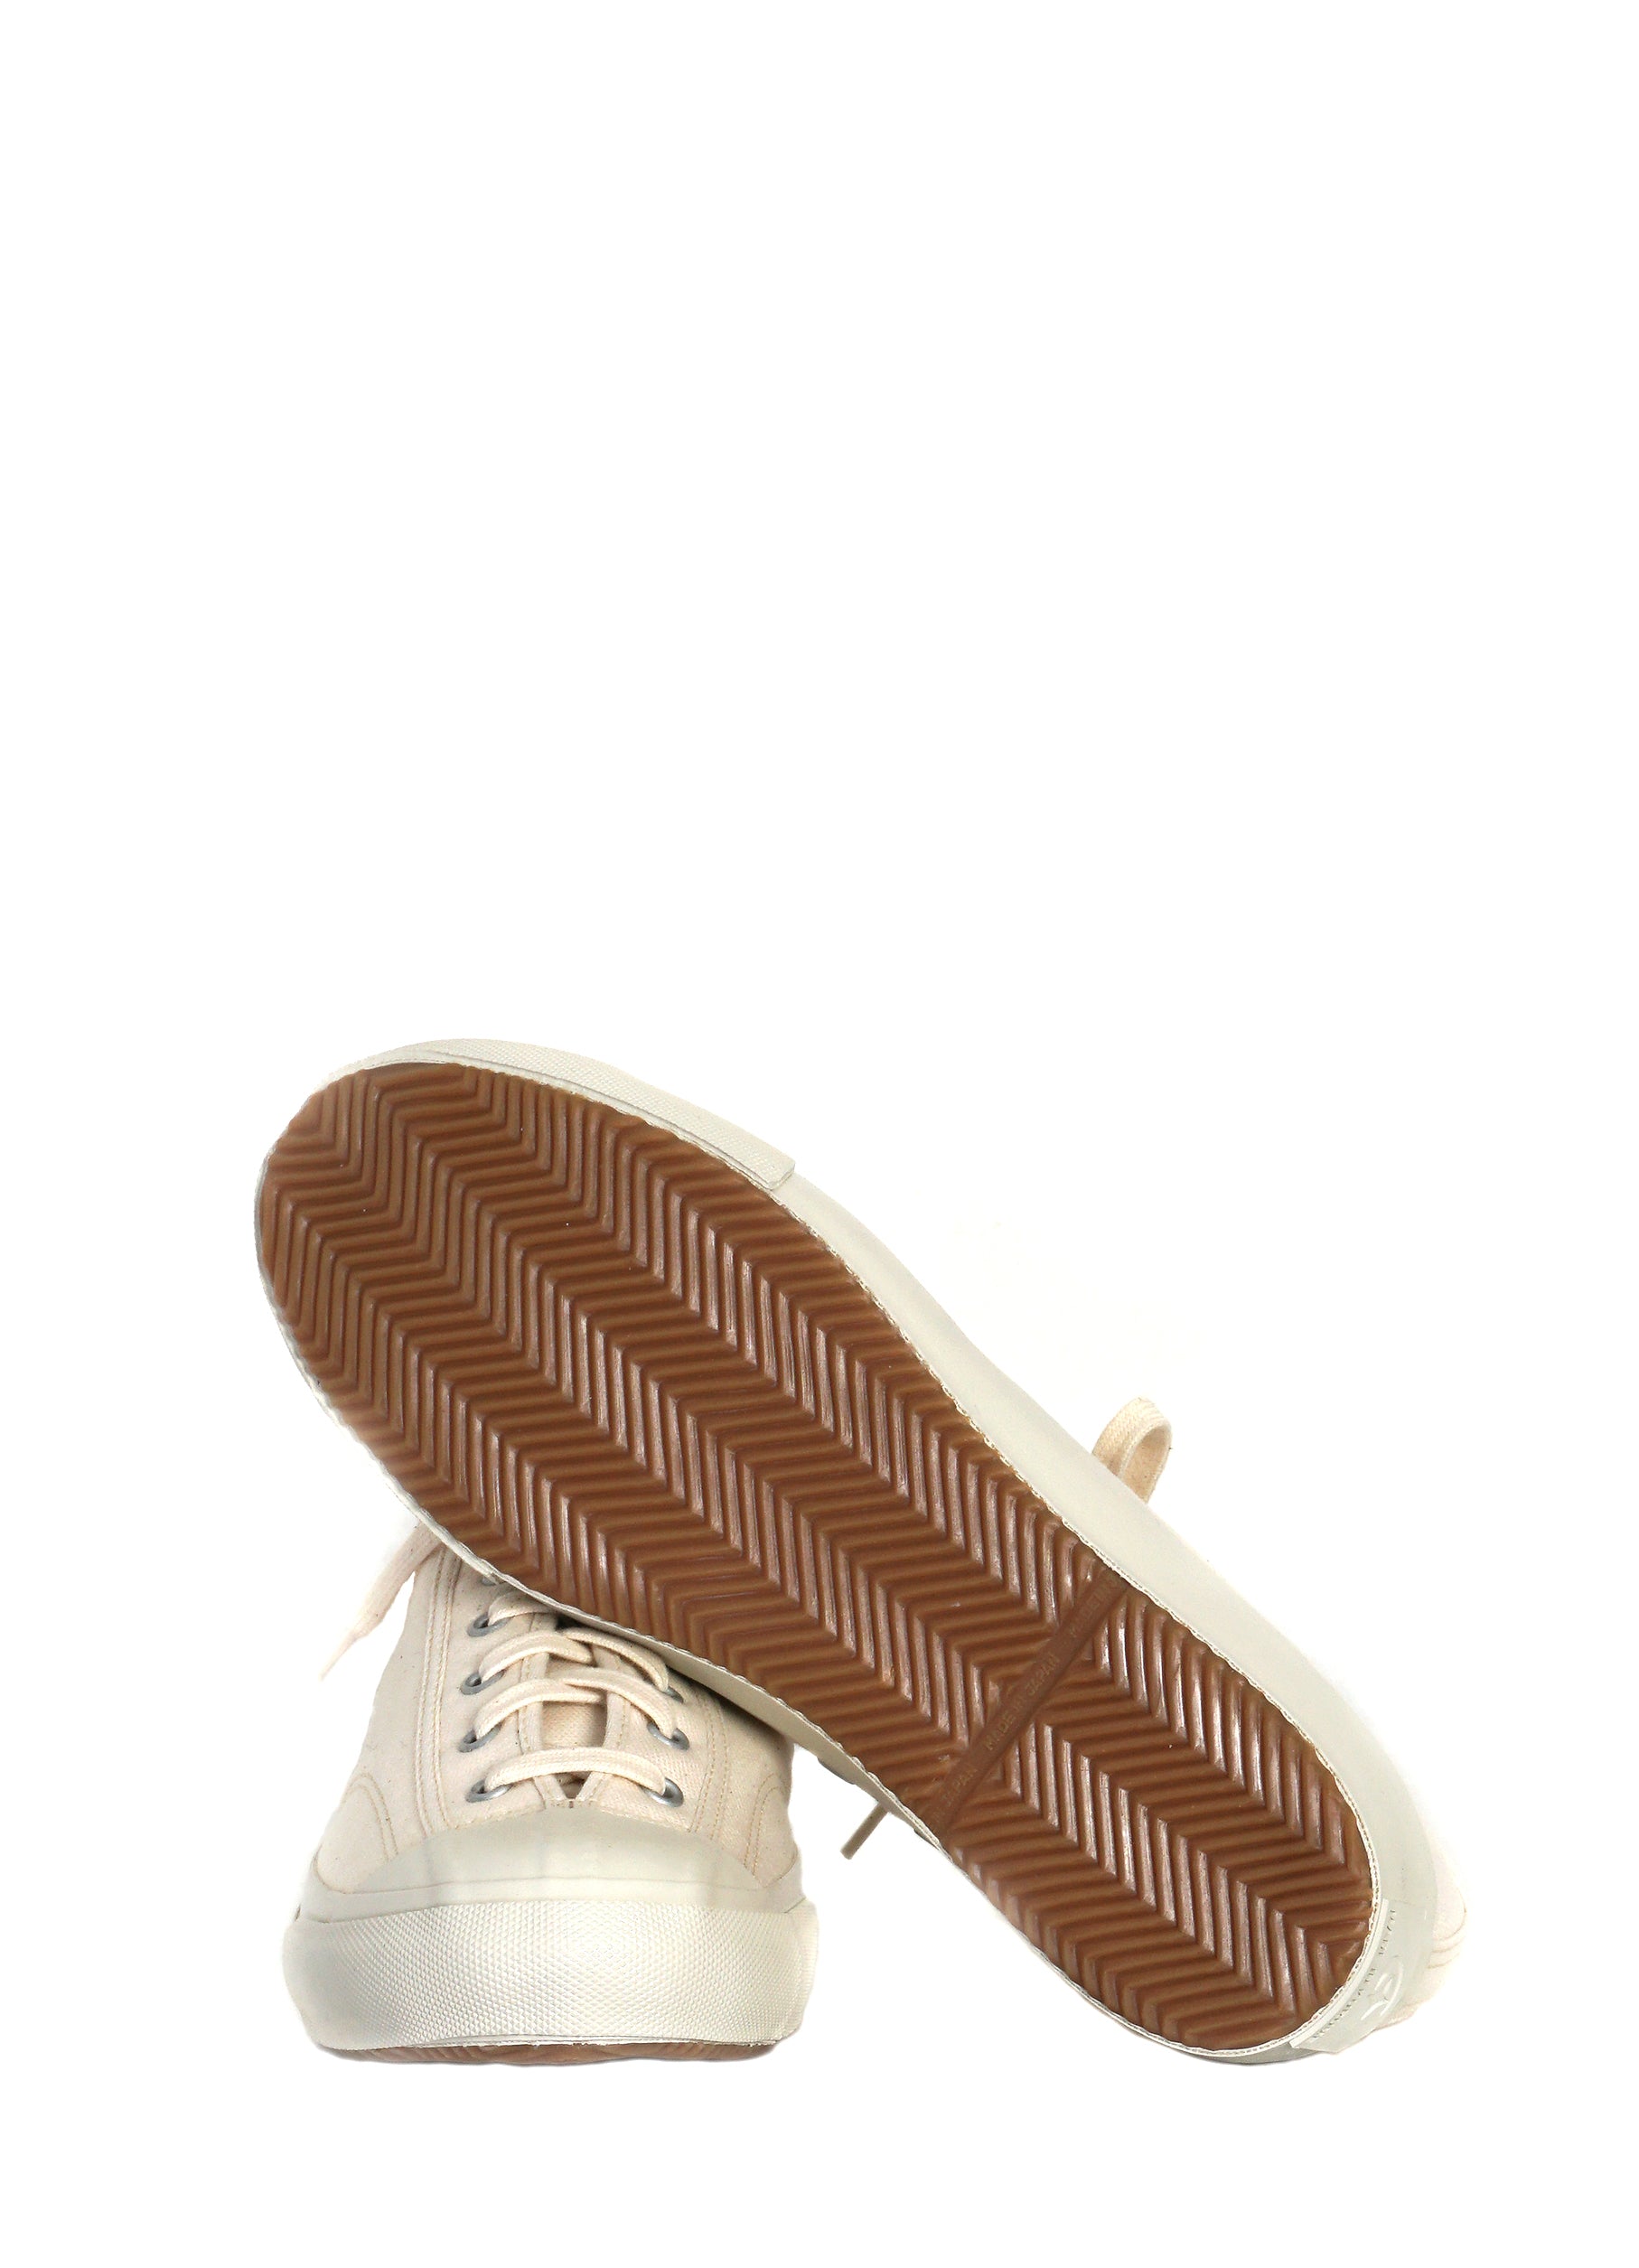 GYM CLASSIC | Canvas Vulcanised Sole Sneaker | White